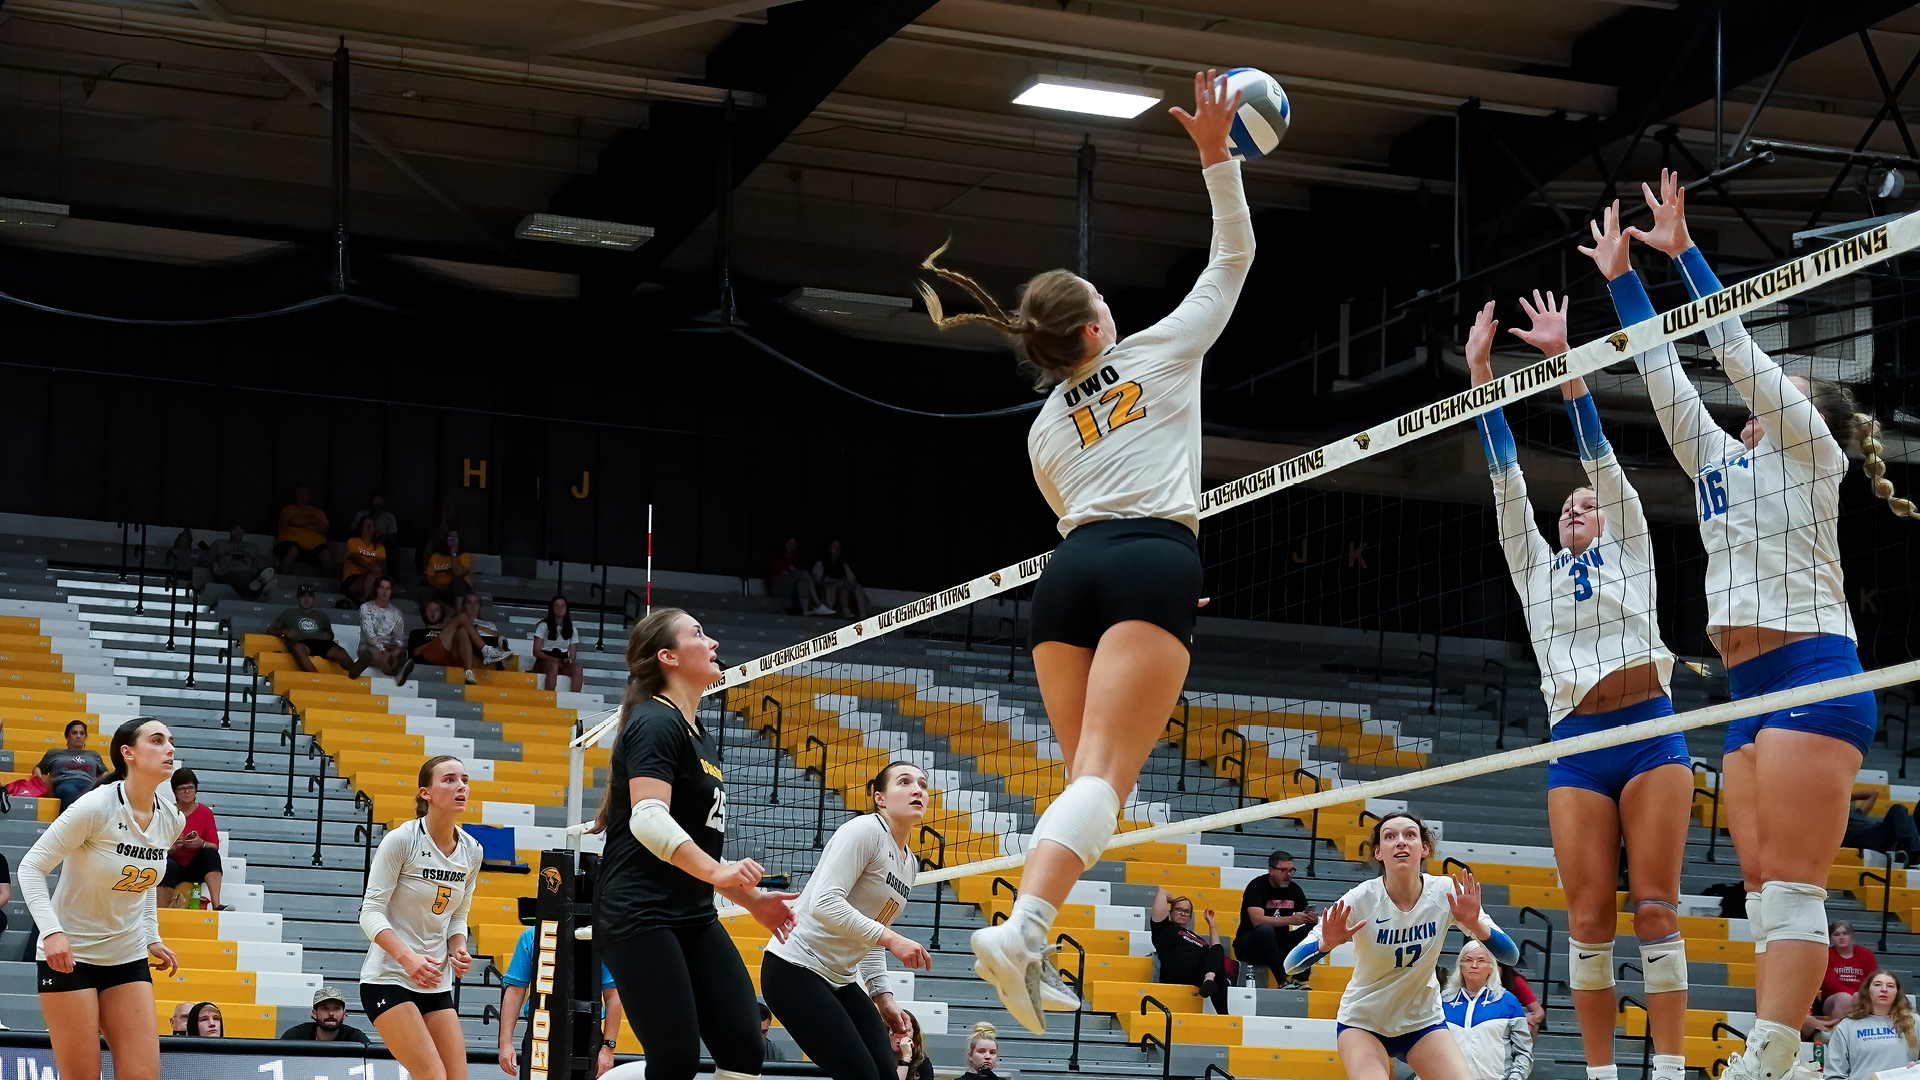 Hannah Moe recorded her third double-digit kill match in the win